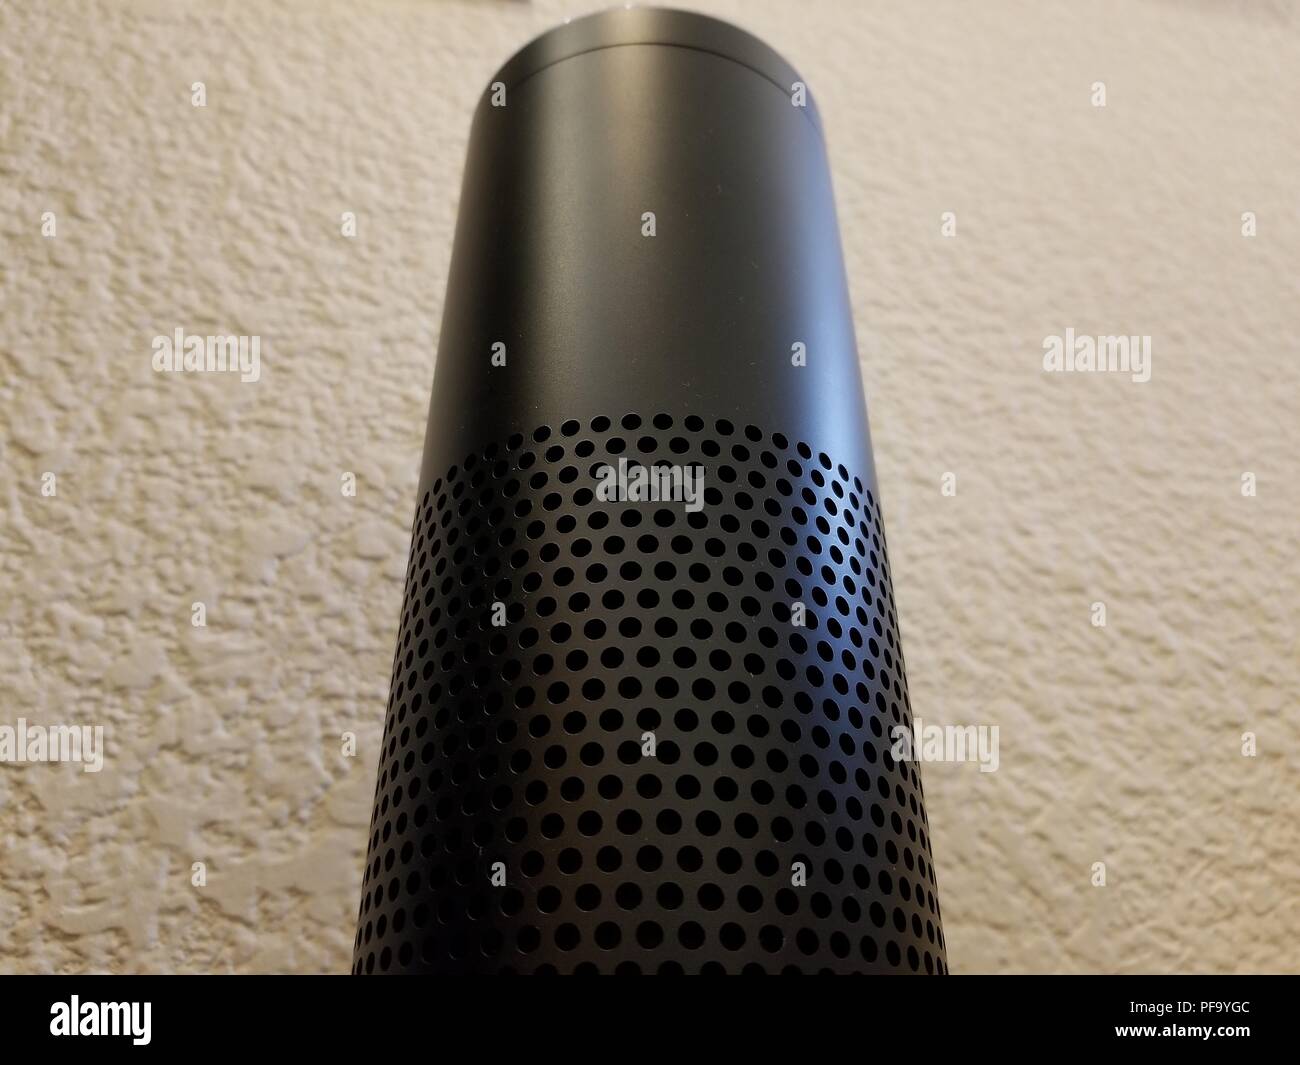 Low-angle, close-up view of Amazon Echo smart speaker using the Alexa service against a white wall in a home setting, suggesting an ominous or imposing presence, San Ramon, California, May 31, 2018. () Stock Photo